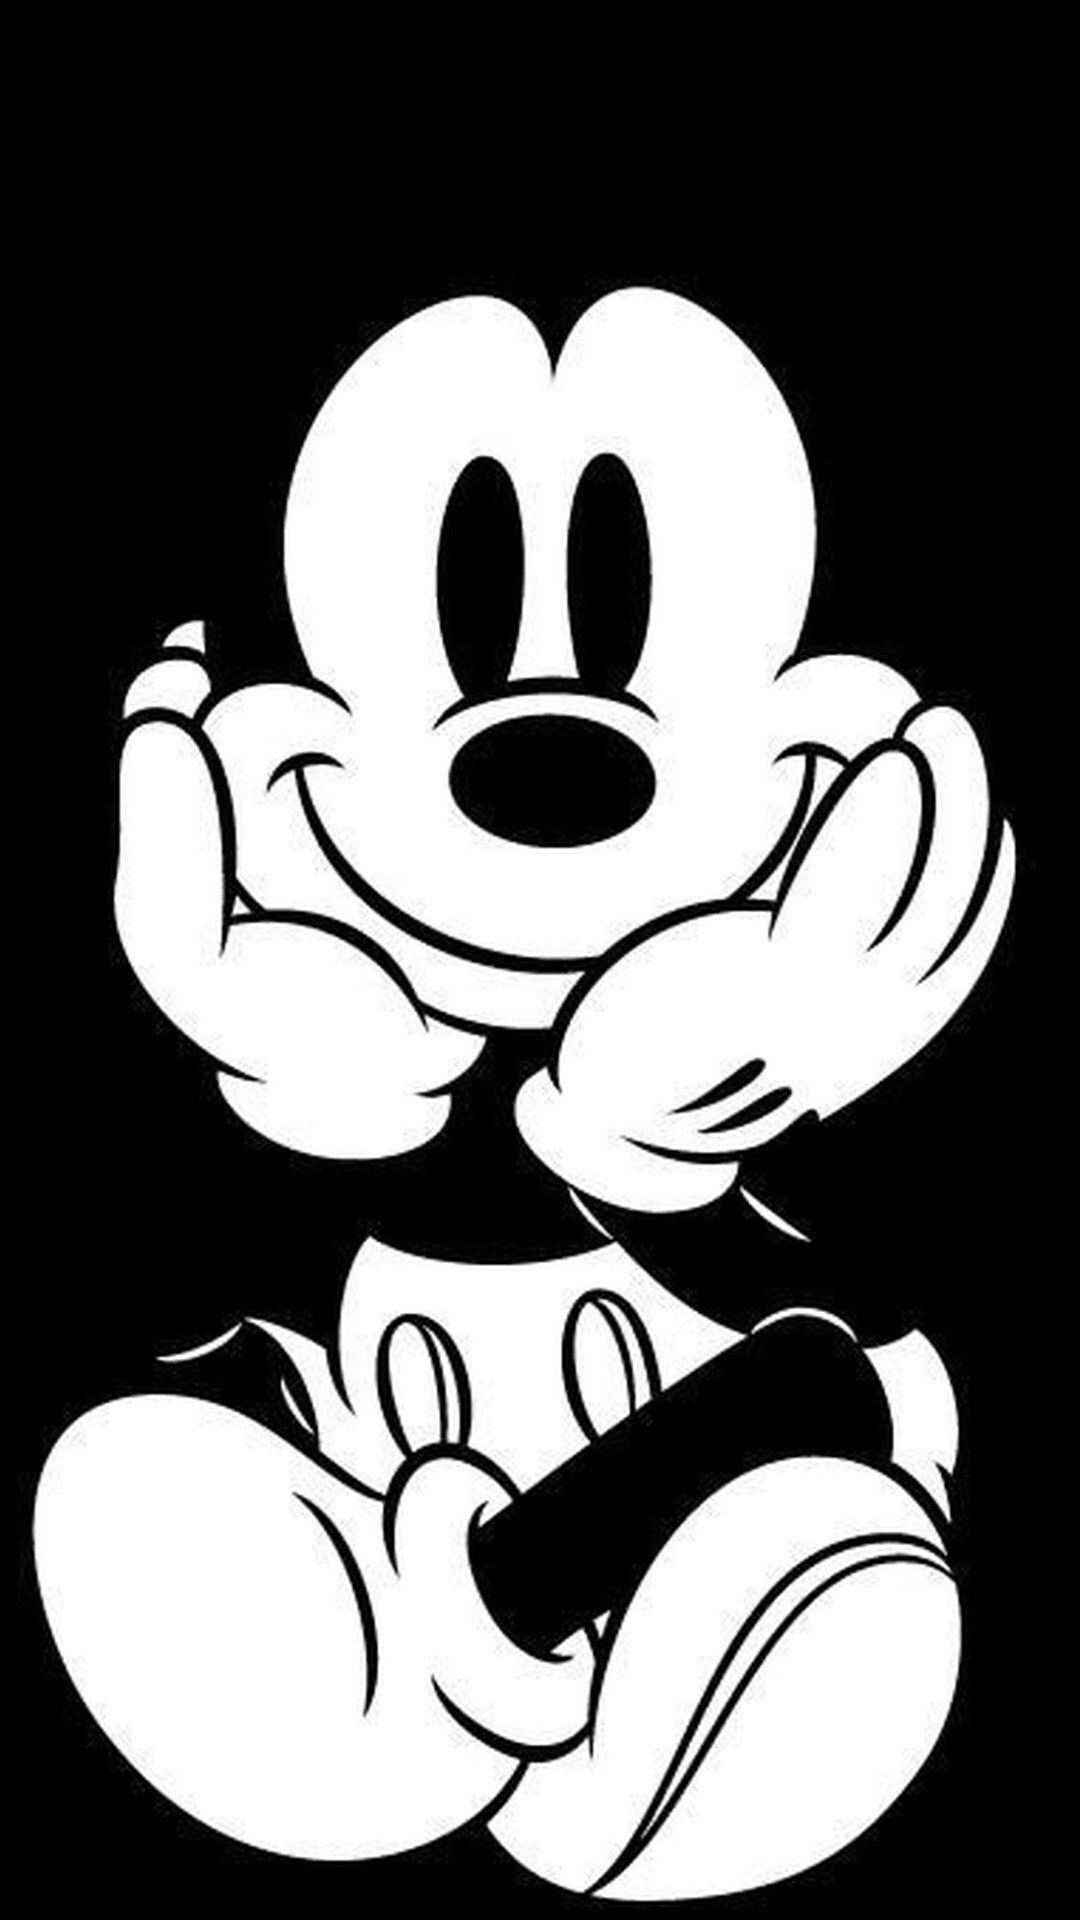 Black And White Mickey Mouse Iphone Background